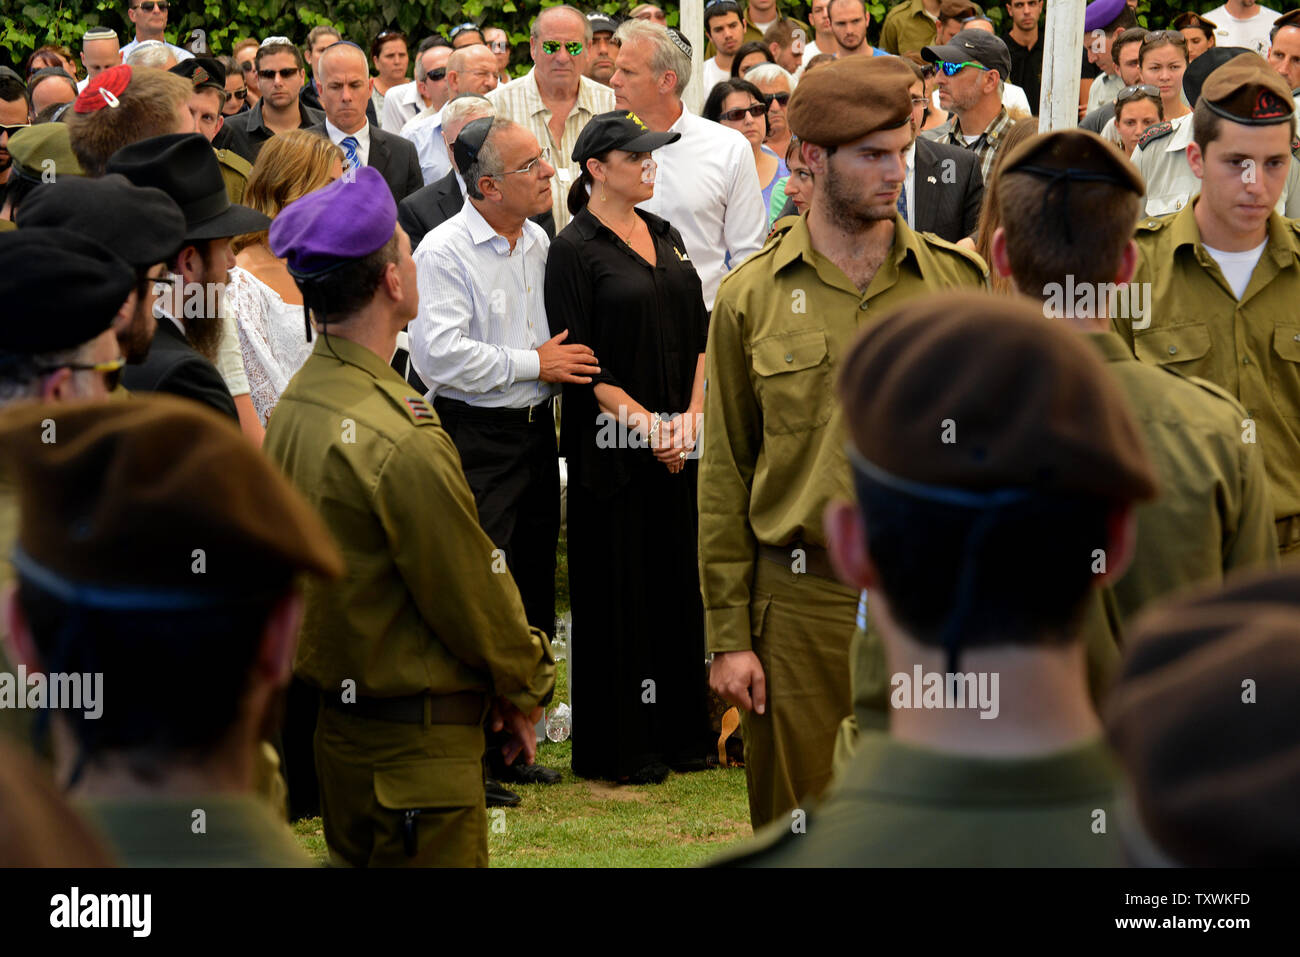 Stuart and Evie Steinberg, from California, attend the funeral of their son, American-Israeli soldier Max Steinberg, 24, in the military cemetery on Mt. Herzl in Jerusalem, Israel, July 23, 2014.  Steinberg, a native of Los Angeles, California, immigrated to Israel and enlisted in the Israel Defense Forces in 2012, where he served as a sharpshooter in the elite Golani Brigade. He was among the 13 soldiers killed by Palestinian militants in the Gaza Strip on Sunday. Twenty-nine Israeli troops have been killed since the army launched a ground incursion into Gaza last week. More than 30,000 peopl Stock Photo